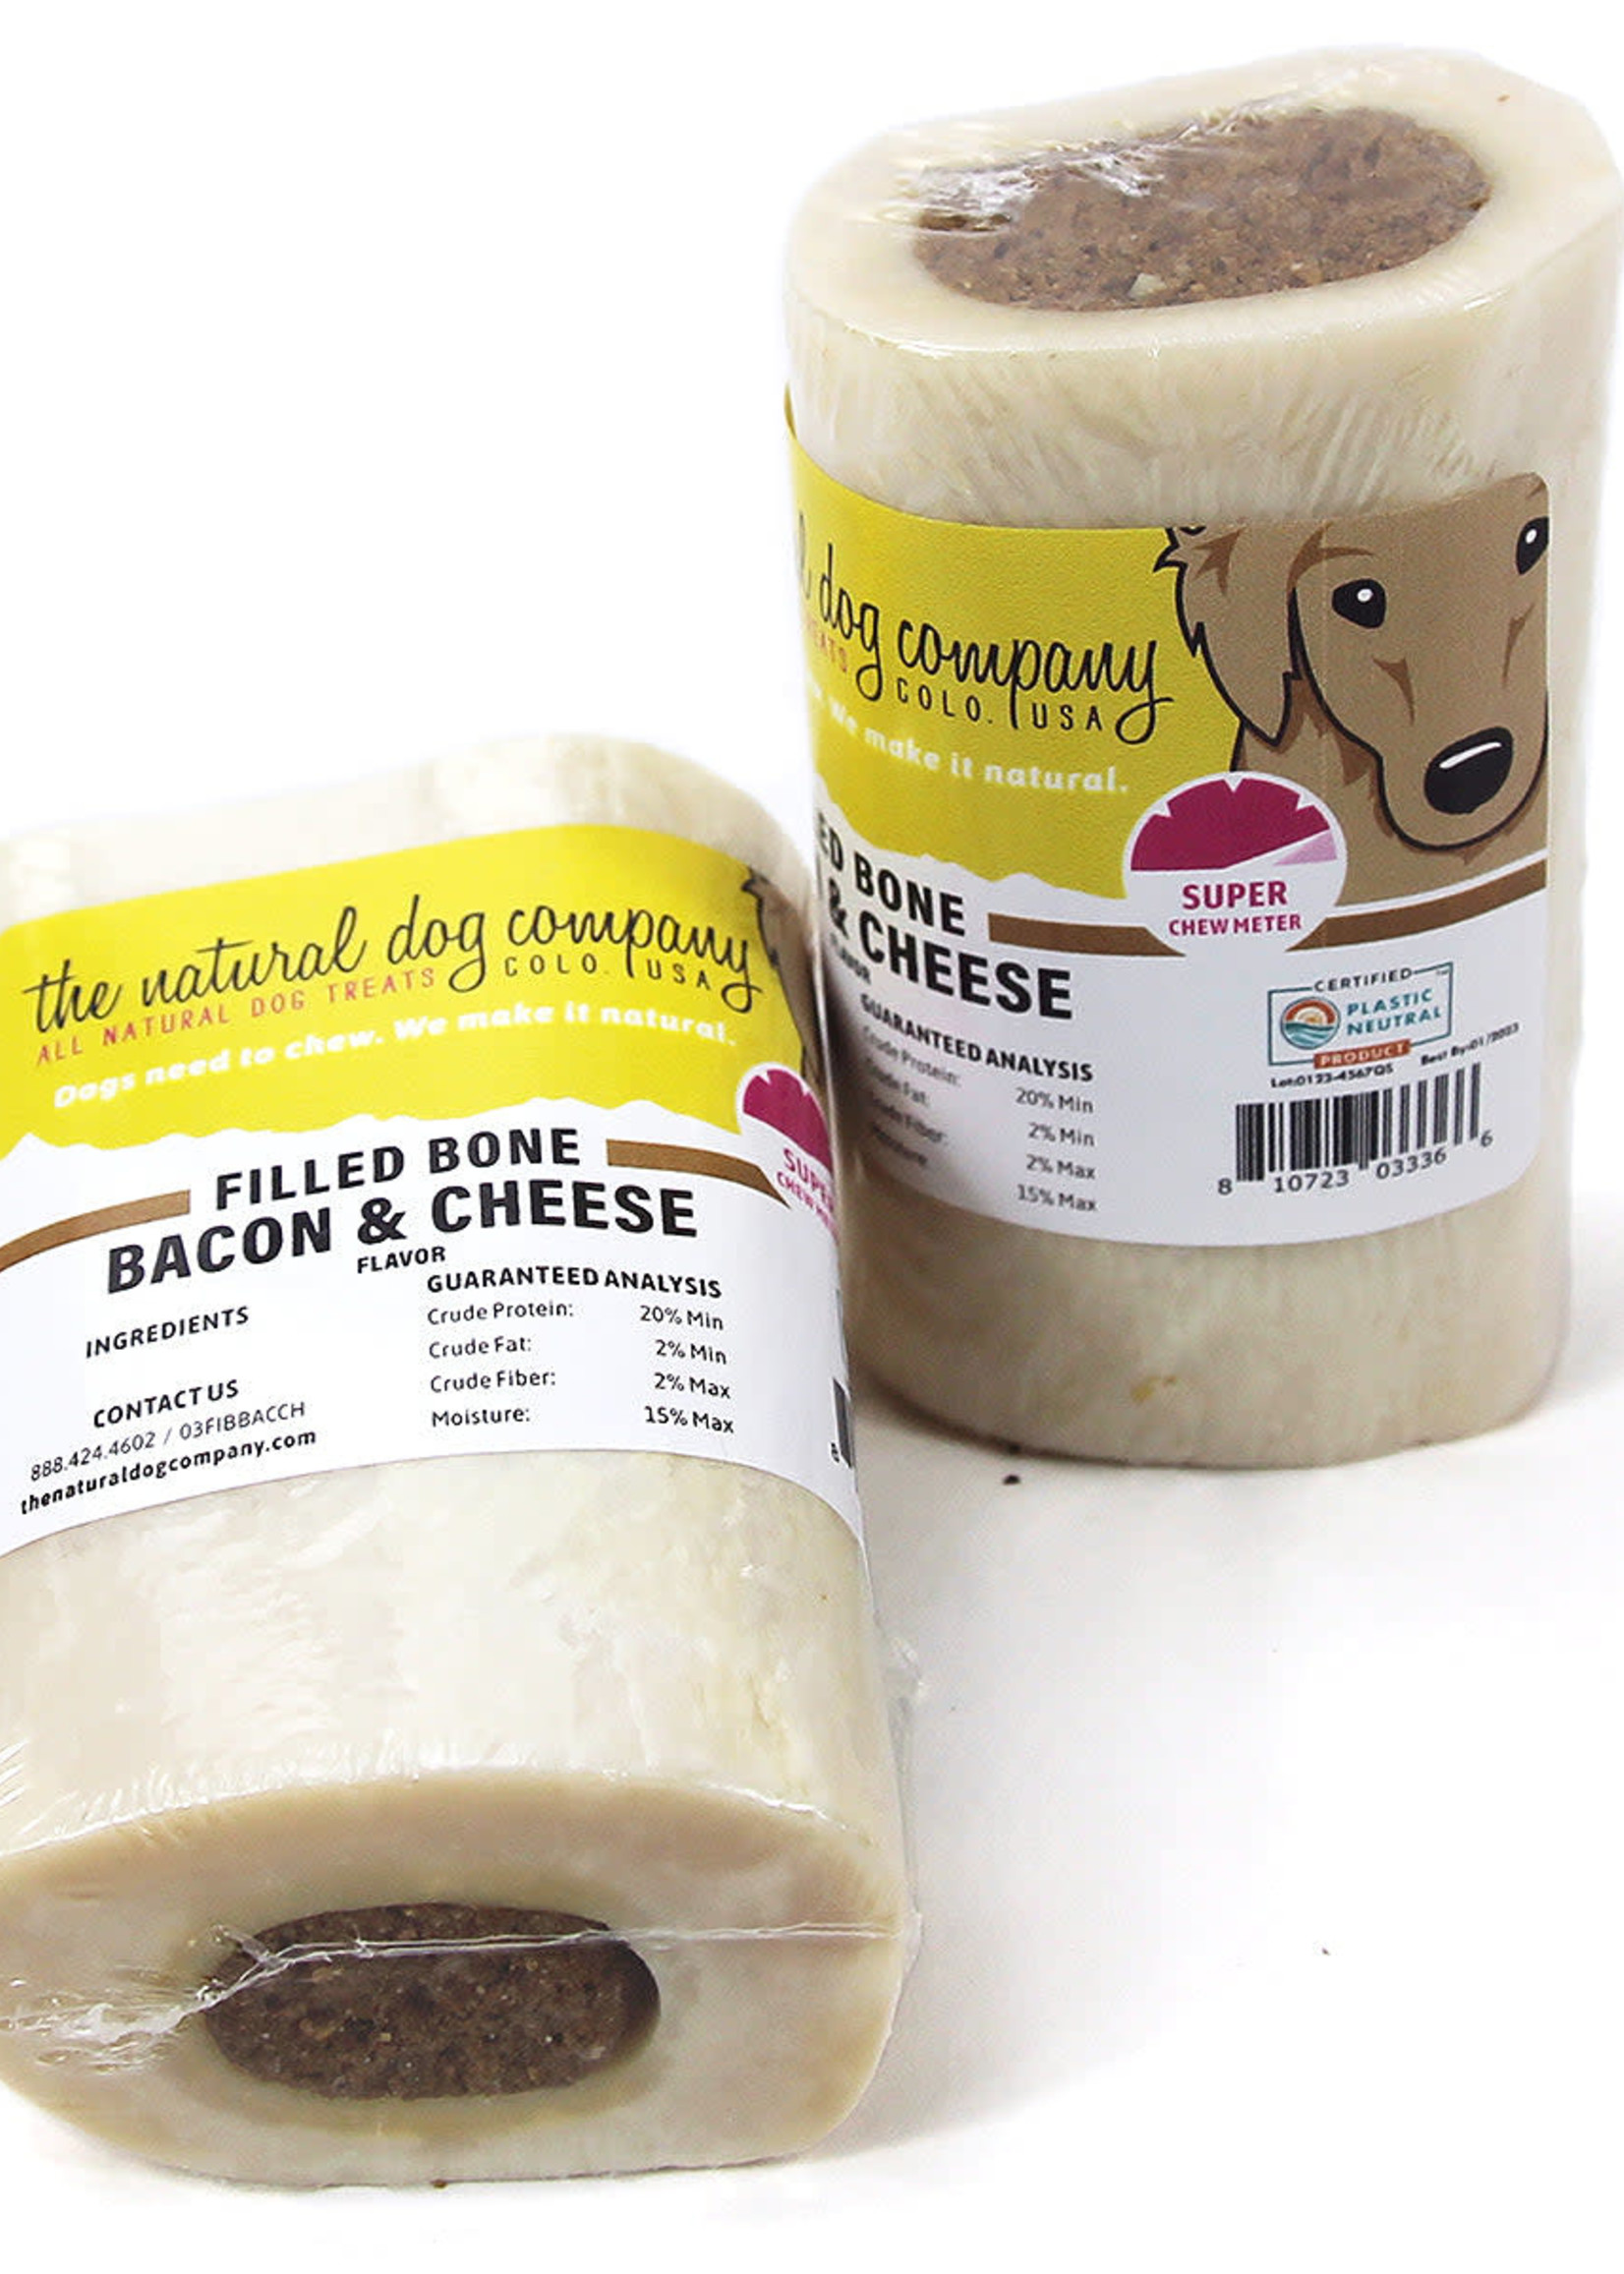 The Natural Dog Company The Natural Dog Company | Filled Bone - Bacon and Cheese Flavor